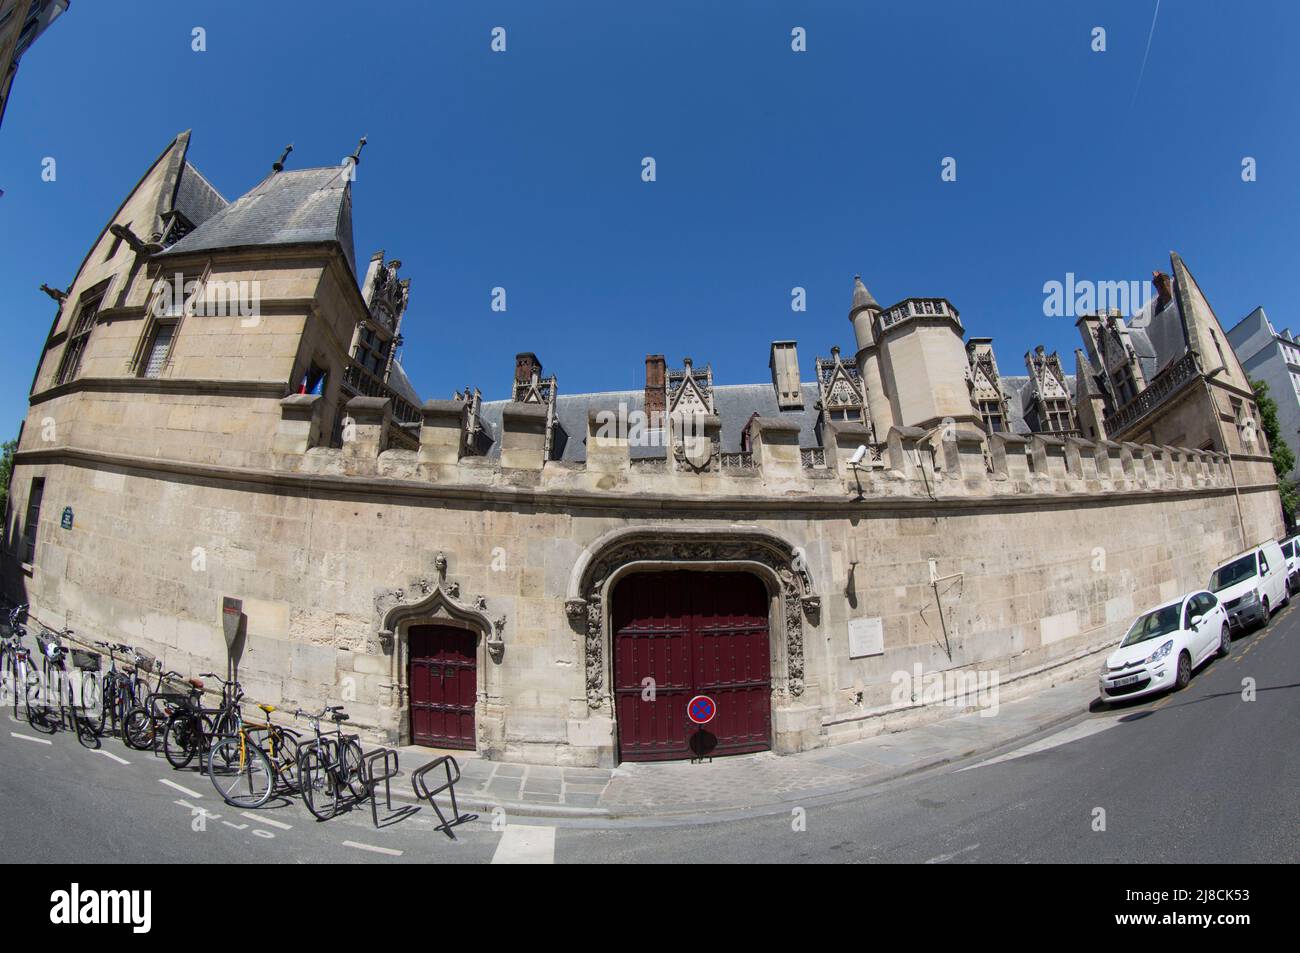 MUSEUM OF CLUNY AFTER REOPENING Stock Photo